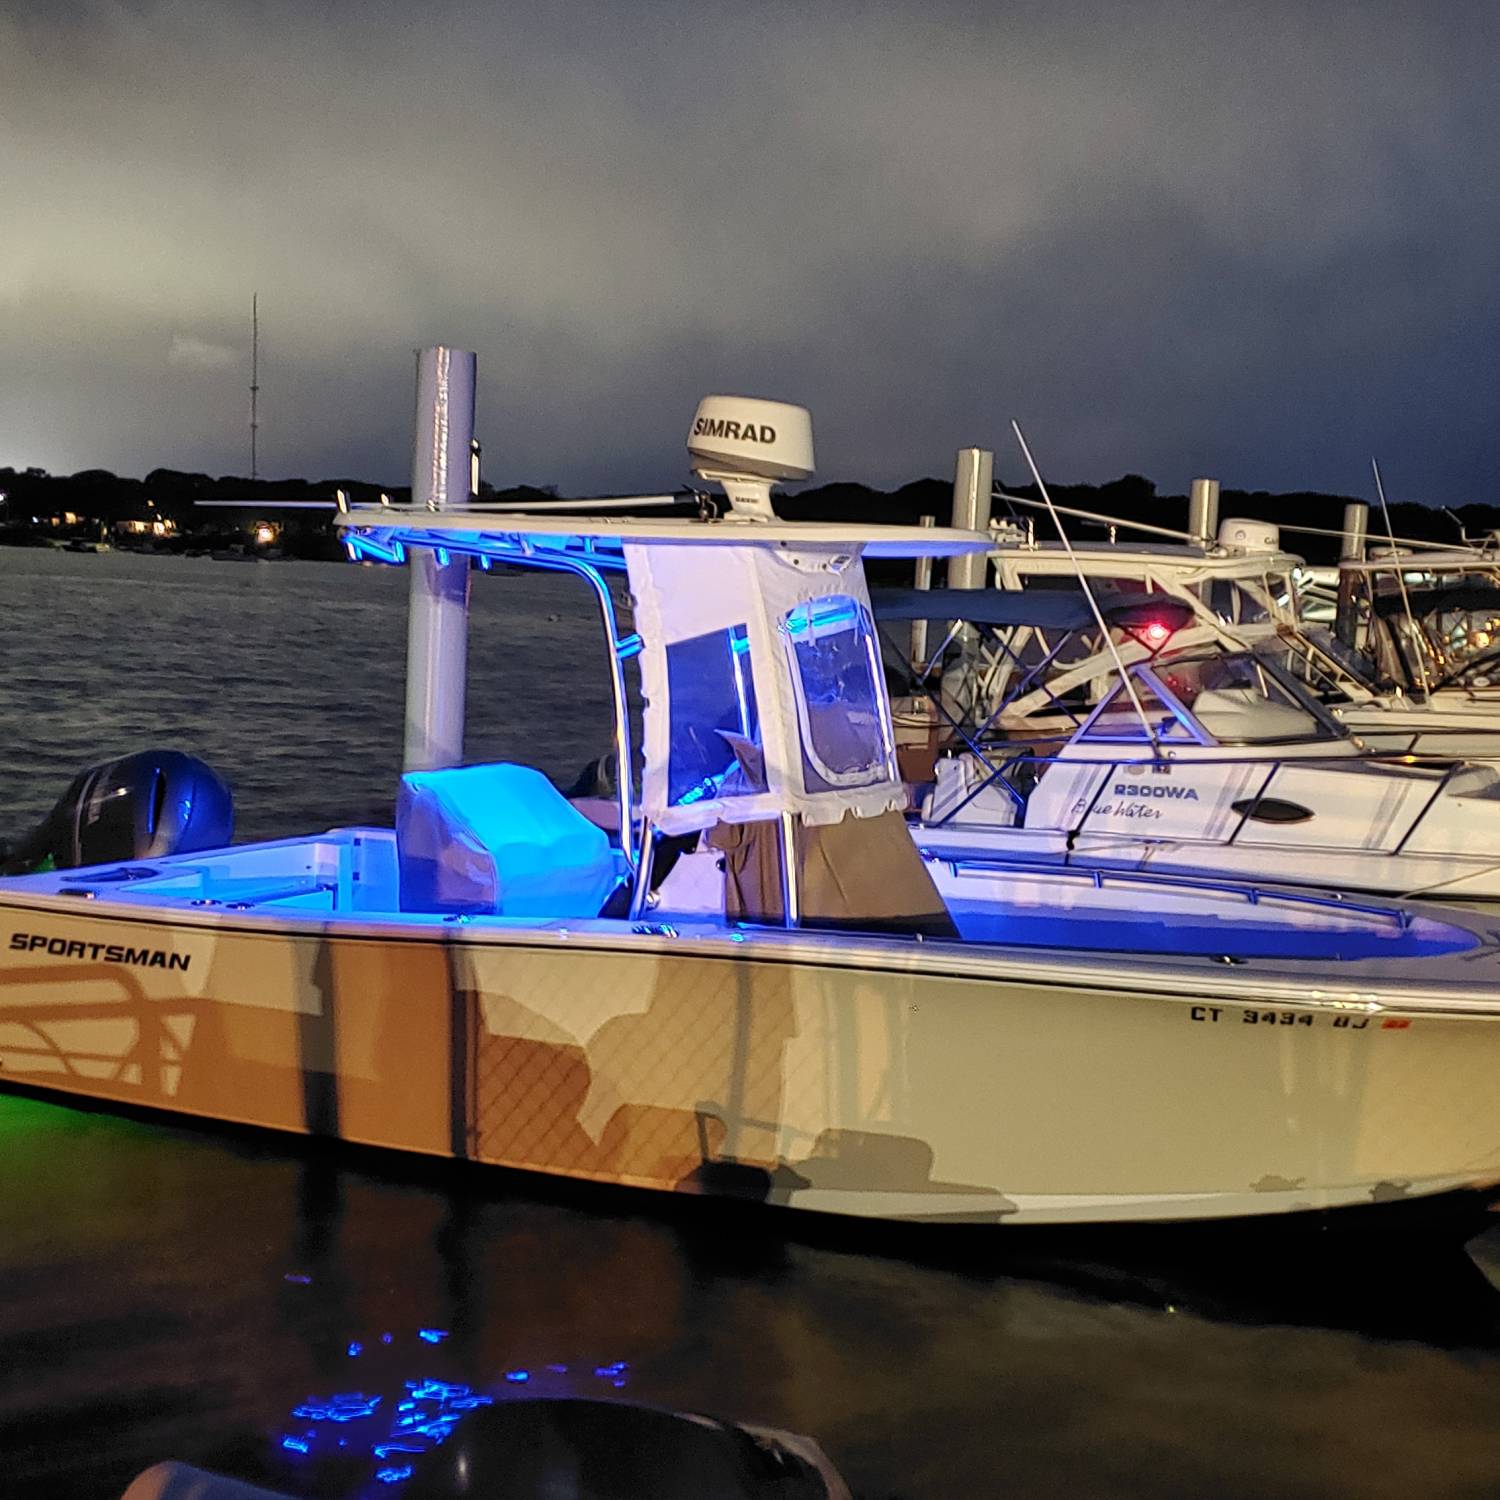 Title: Night light - On board their Sportsman Open 232 Center Console - Location: Falmouth MA.. Participating in the Photo Contest #SportsmanAugust2021